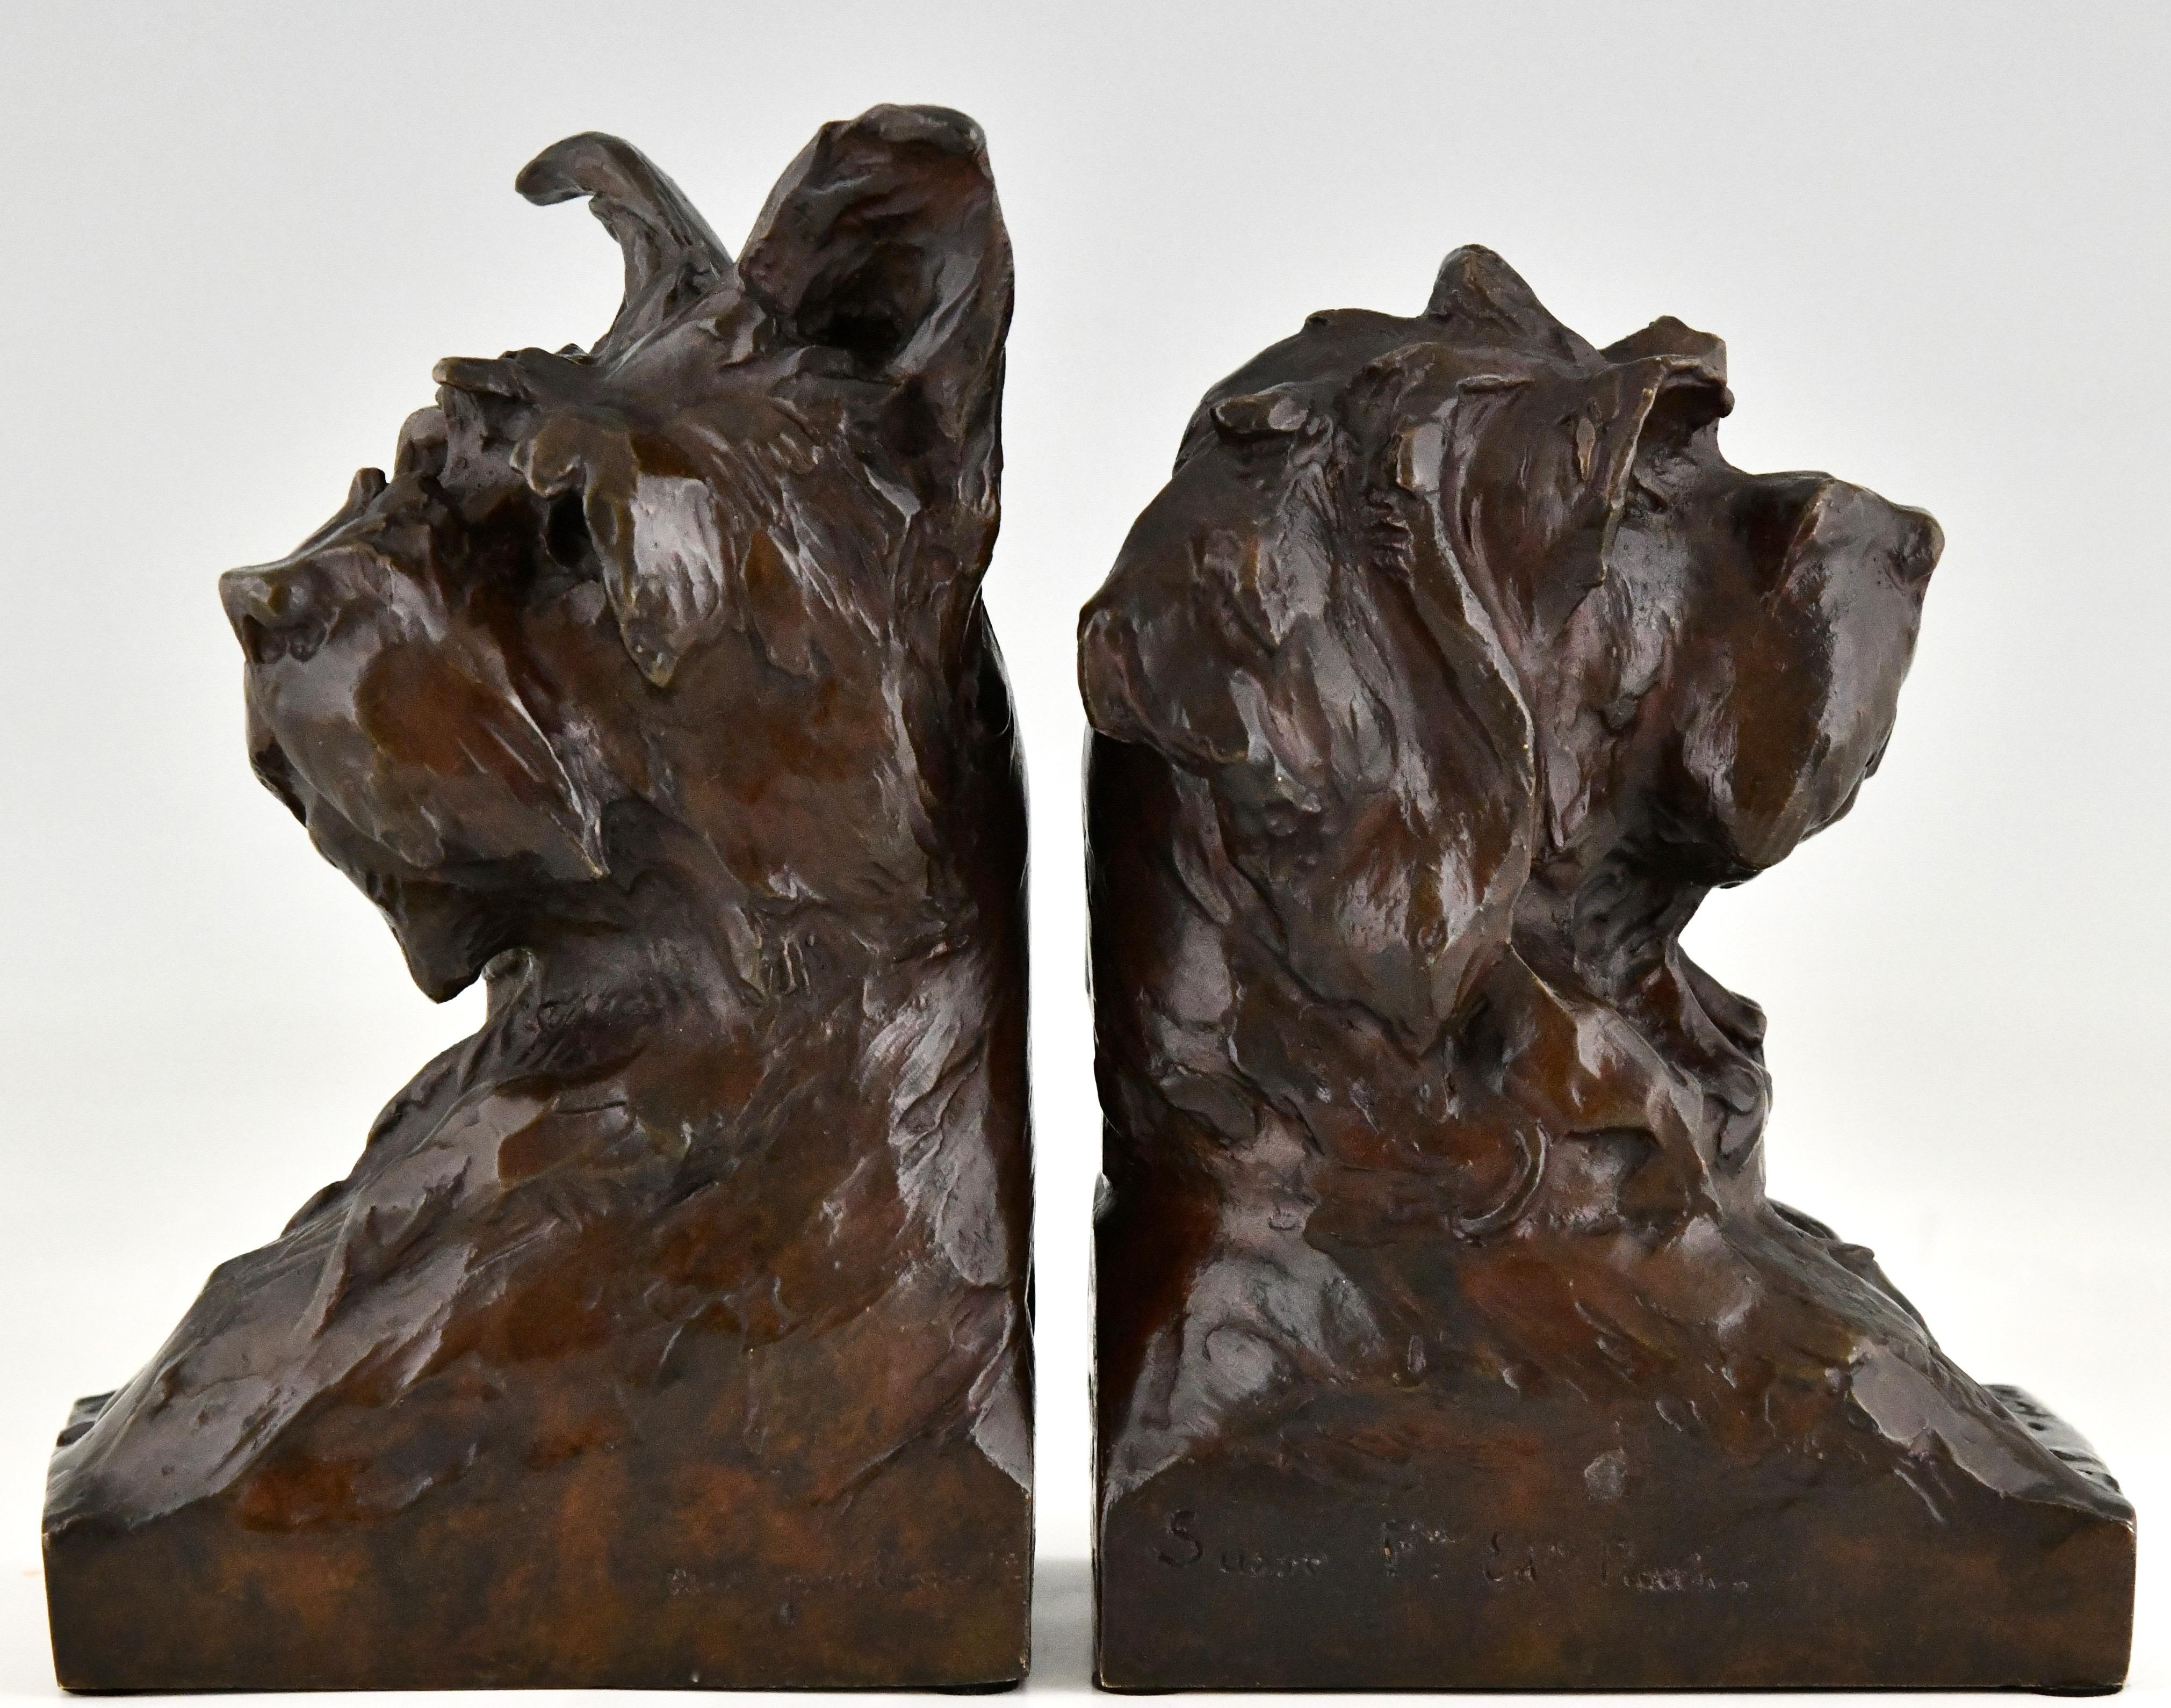 Art Deco bronze bookends in the shape of terrier dog busts by the French artist Maximilien Louis Fiot, 1886-1953. The sculptures have a beautiful patina and are signed by the artist as well as by the founder, Susse Freres. The dog sculptures are